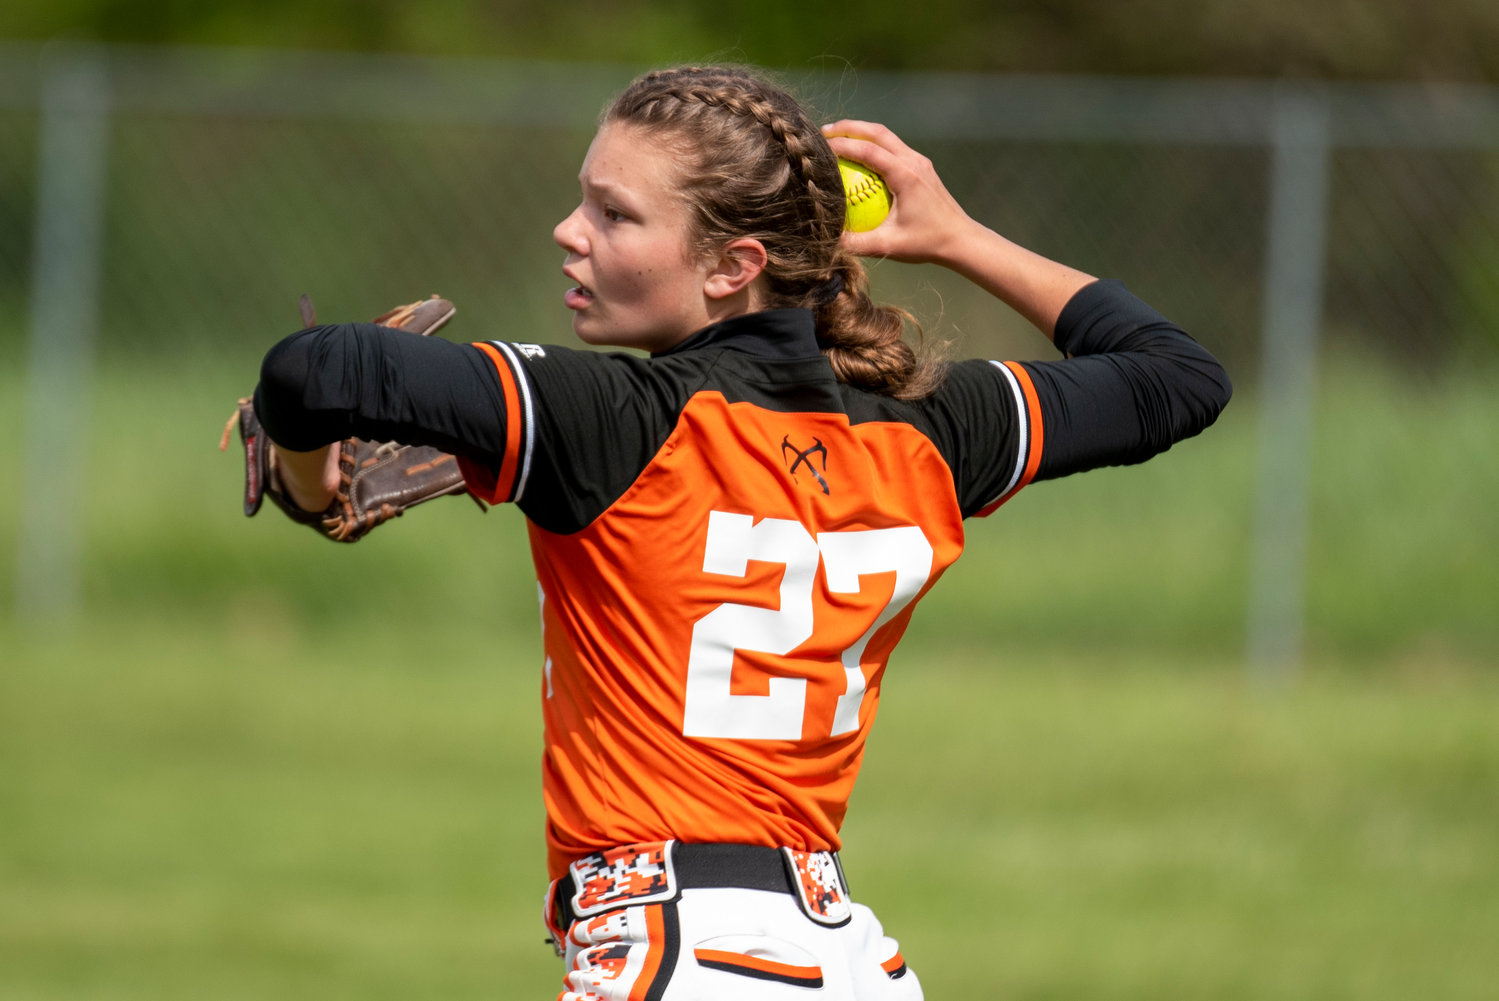 Rainier's Raychel Hansen makes a throw to the infield from right field during a road game in Toledo on April 25.